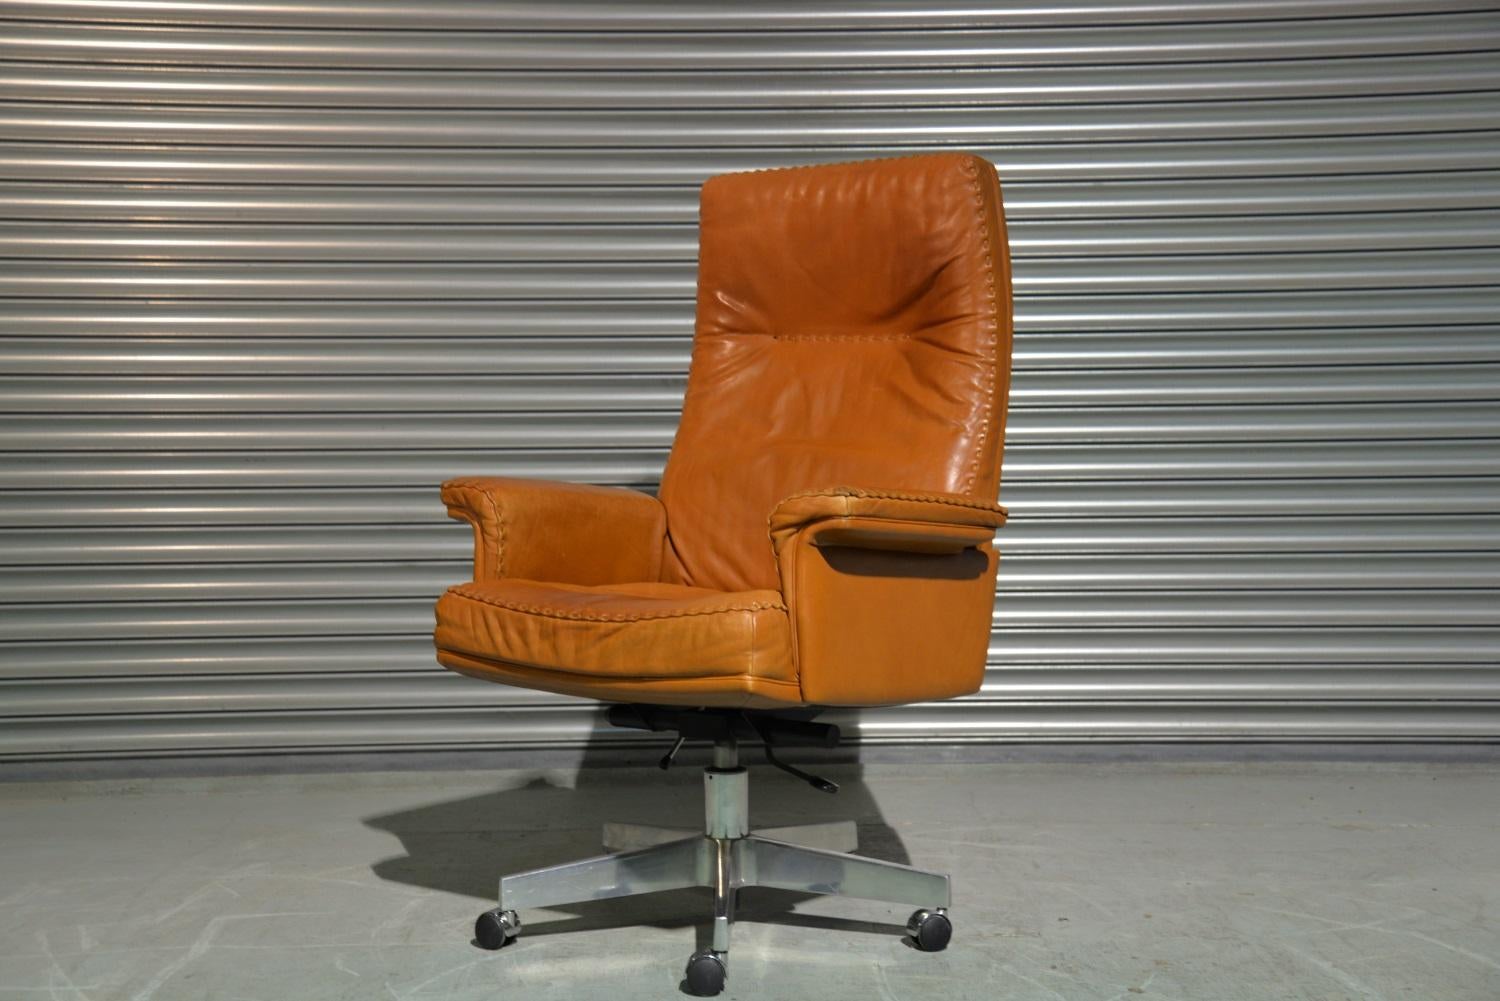 Discounted airfreight for our US and International customers ( from 2 weeks door to door) 

We are delighted to bring to you a extremely rare vintage De Sede DS 35 Executive armchair on casters. Hand built to incredibly high standards by De Sede